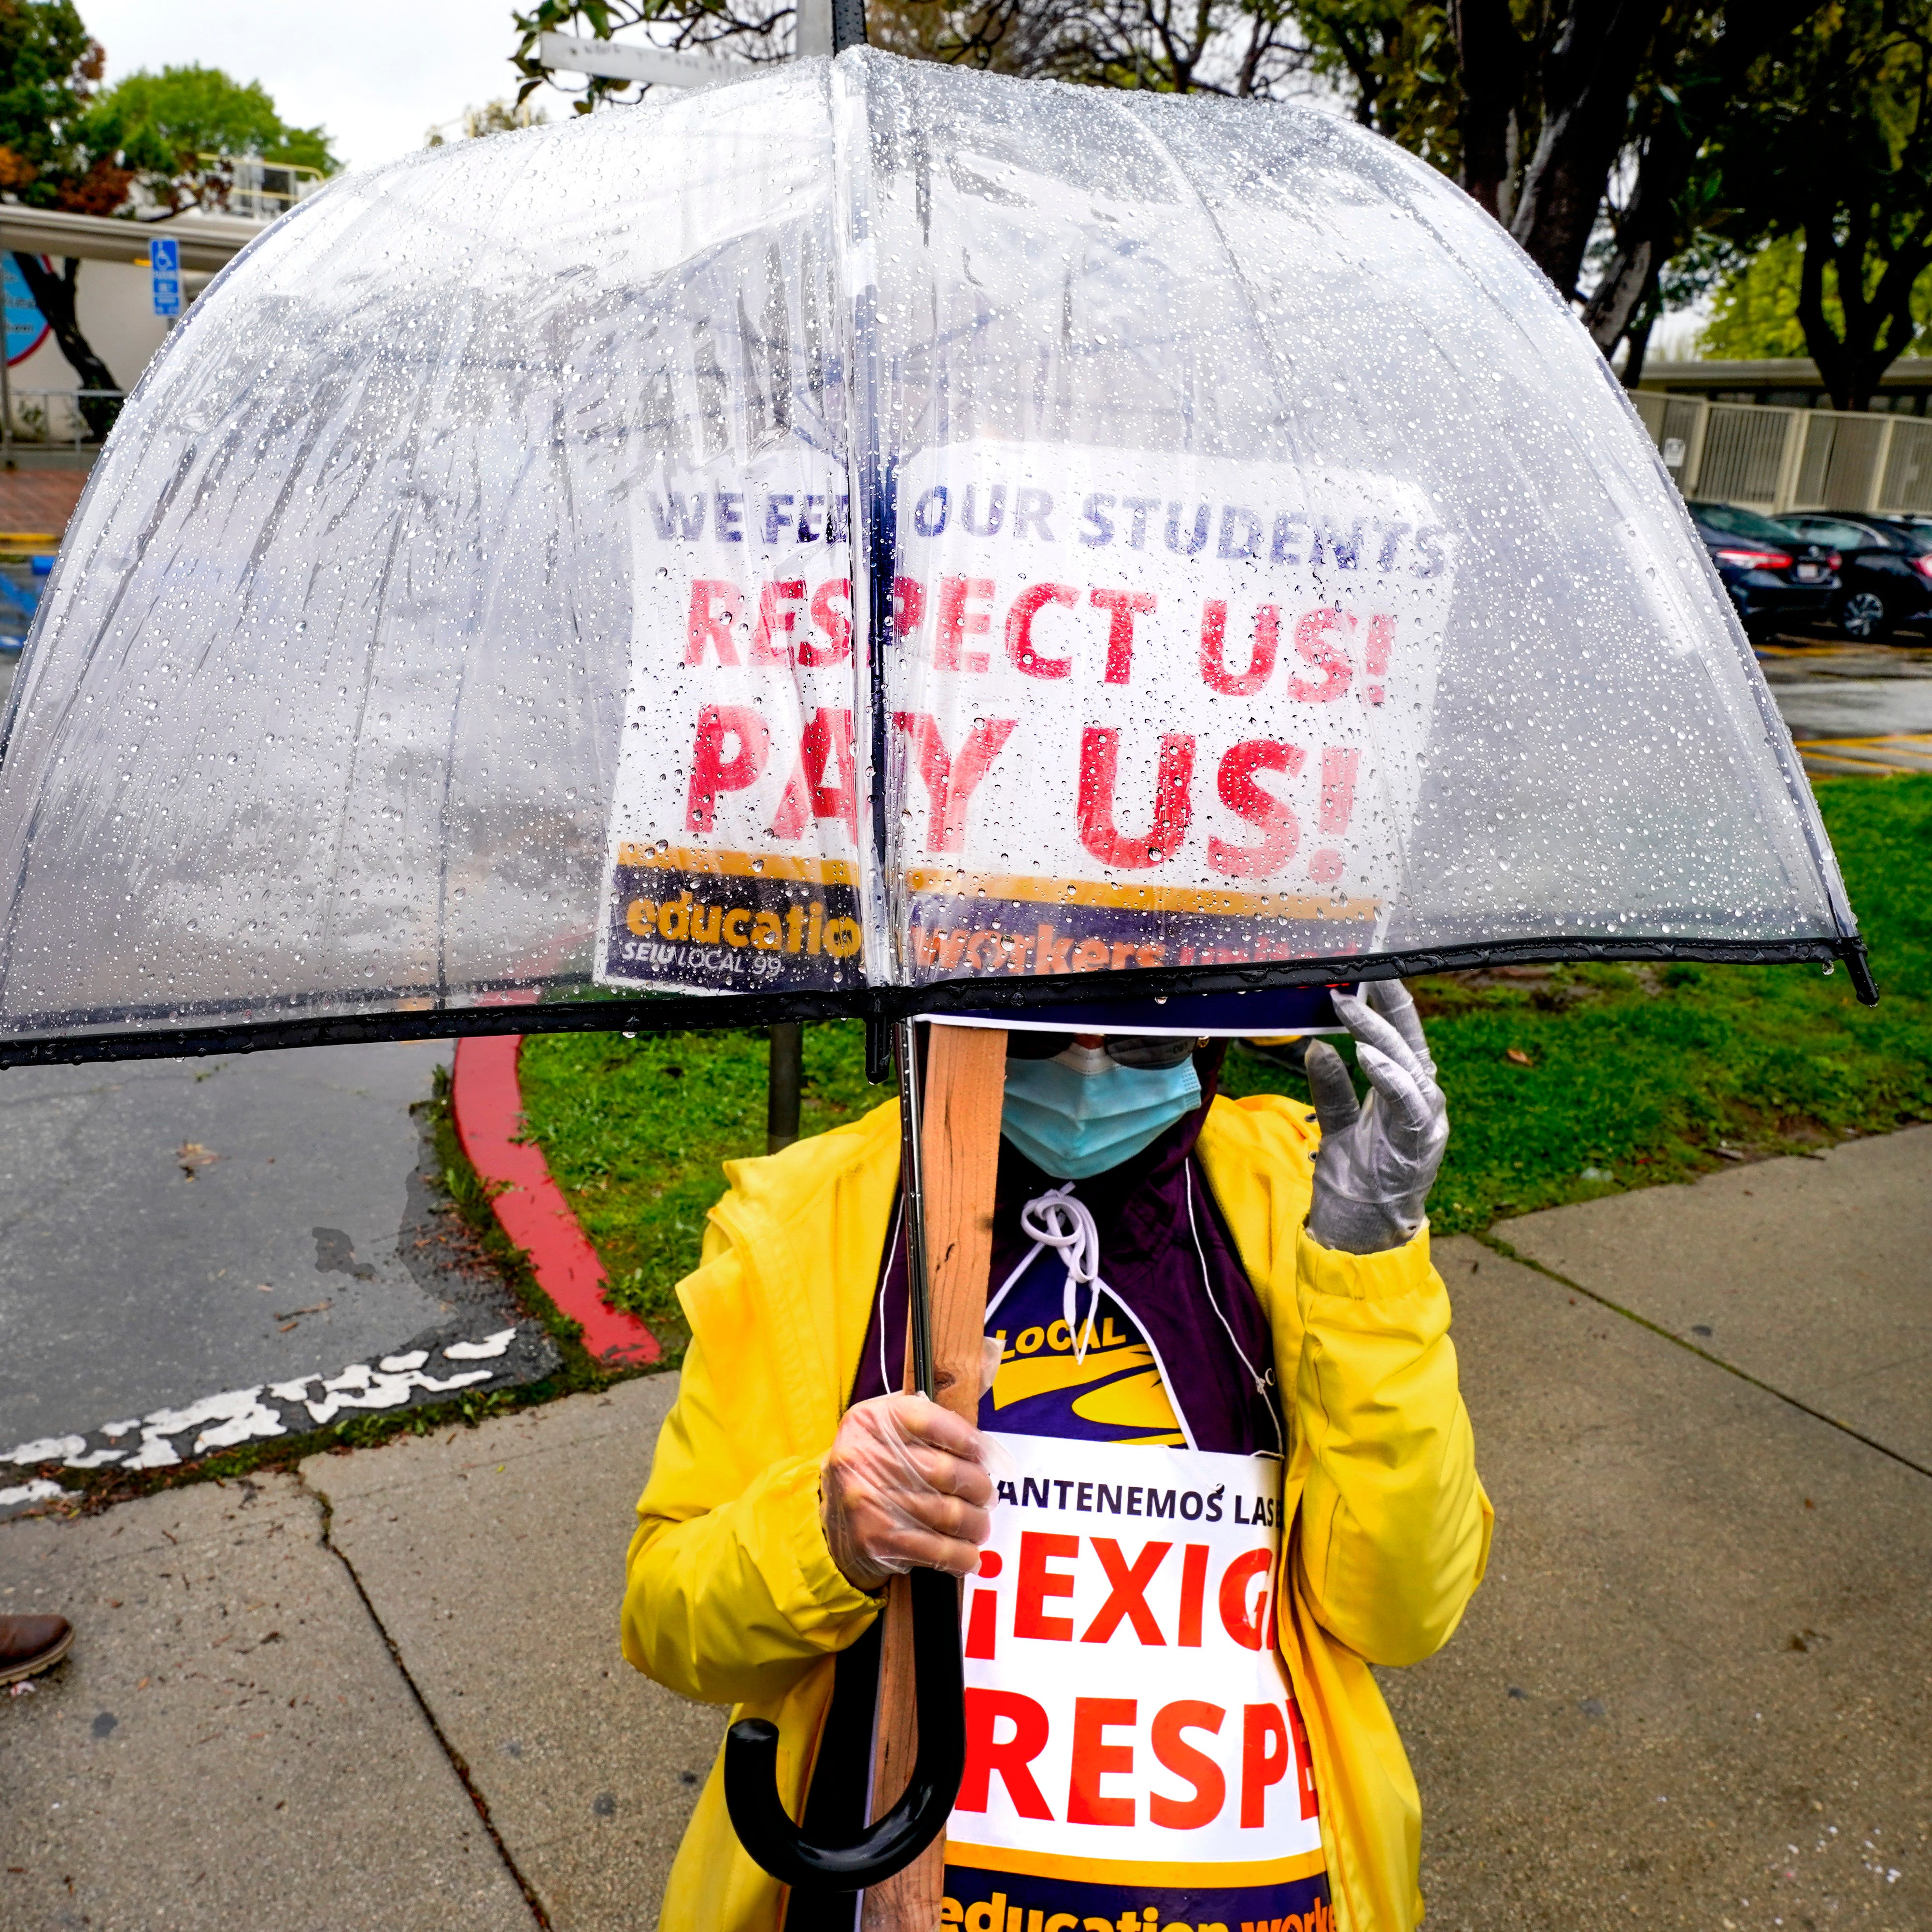 Striking Los Angeles Unified School District employees picket in front of Monroe High School. More than 60,000 bus drivers, custodians, cafeteria employees, campus security, teaching assistants and educators from the Los Angeles Unified School District are striking from March 21 to 23.